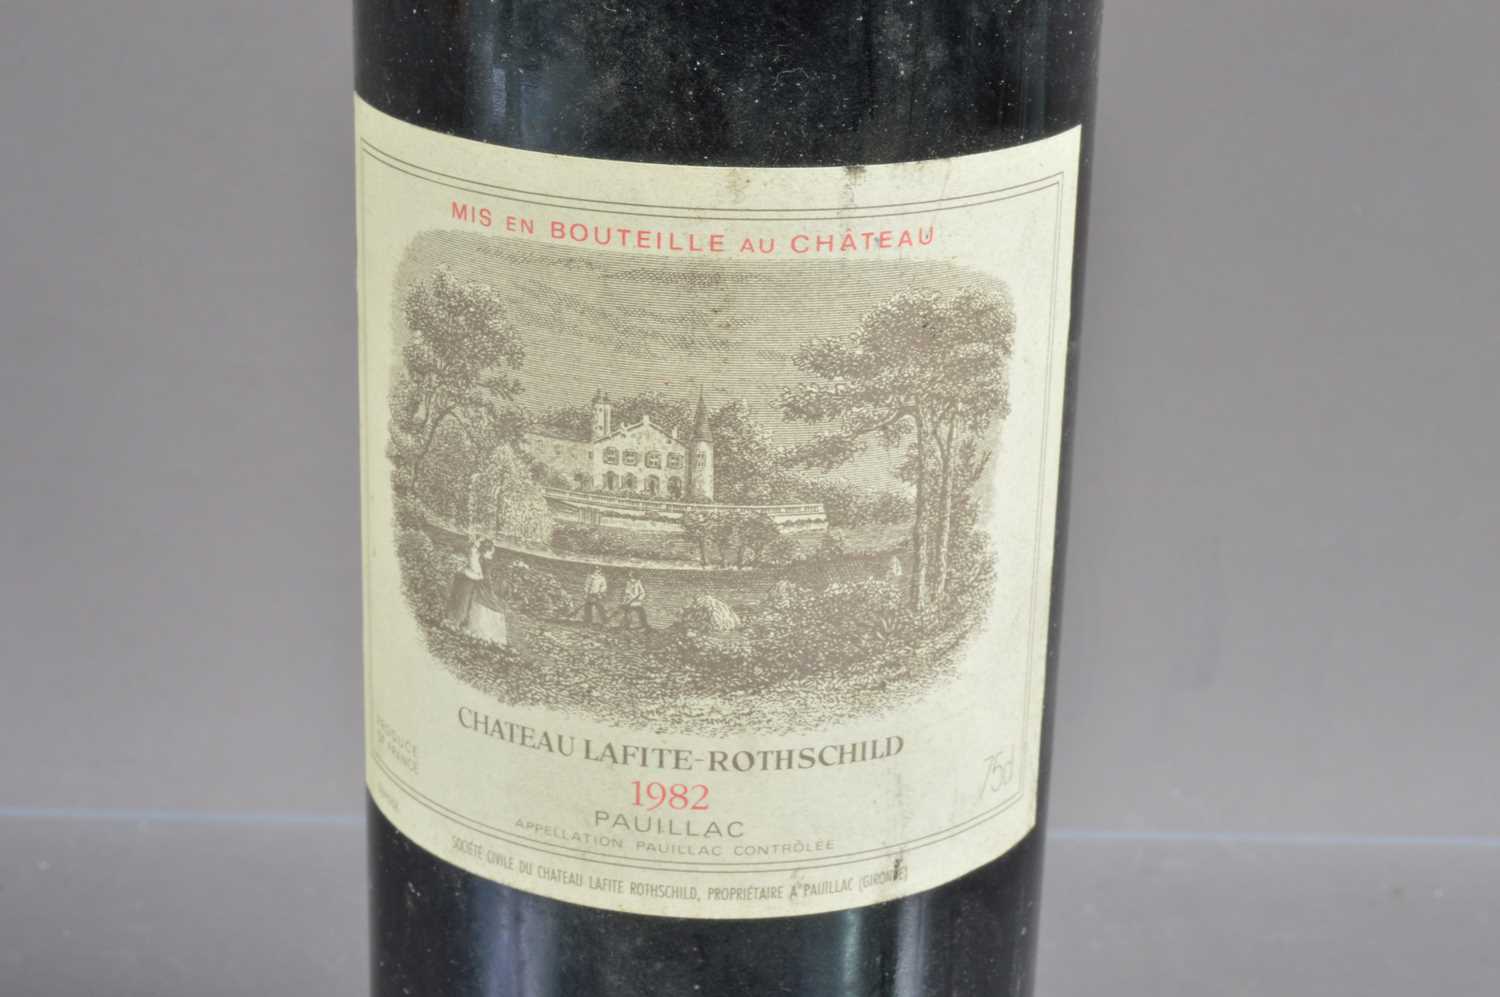 One bottle of Chateau Lafite Rothschild 1982, - Image 2 of 4